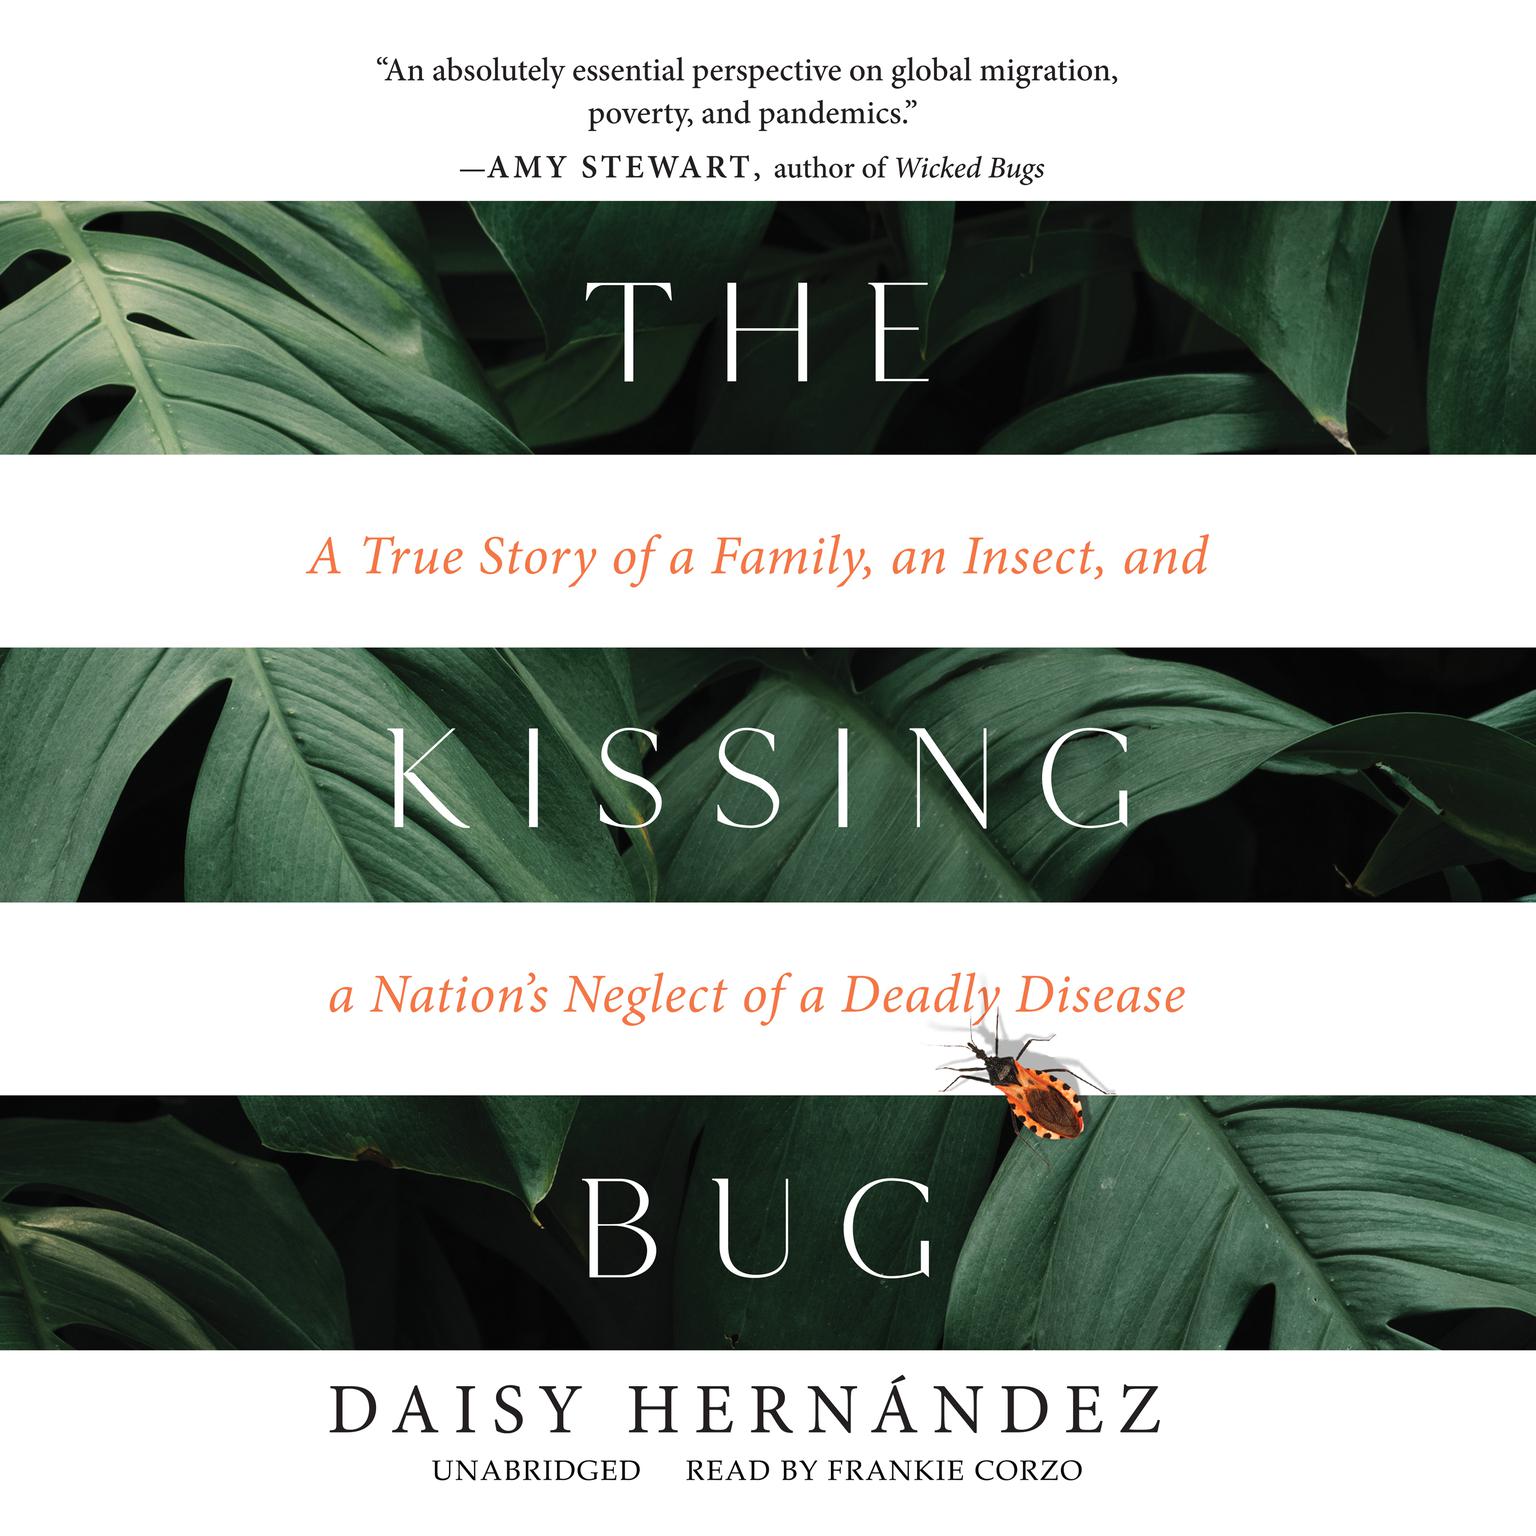 The Kissing Bug: A True Story of a Family, an Insect, and a Nation’s Neglect of a Deadly Disease Audiobook, by Daisy Hernández